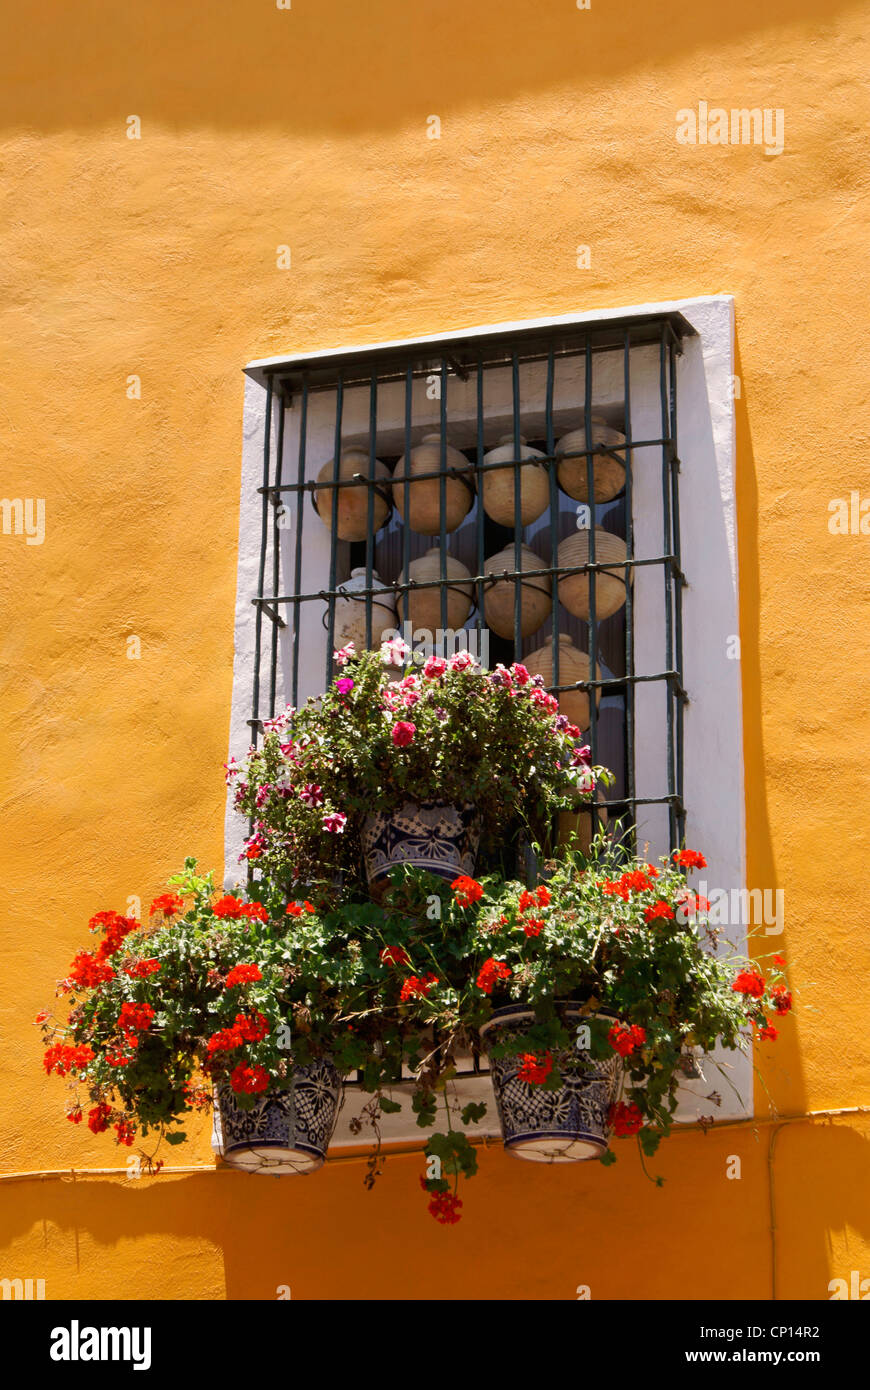 Colorful flowers decorating the window of a house in the city of Puebla, Mexico. The historical center of Puebla is a UNESCO World Heritage Site. Stock Photo